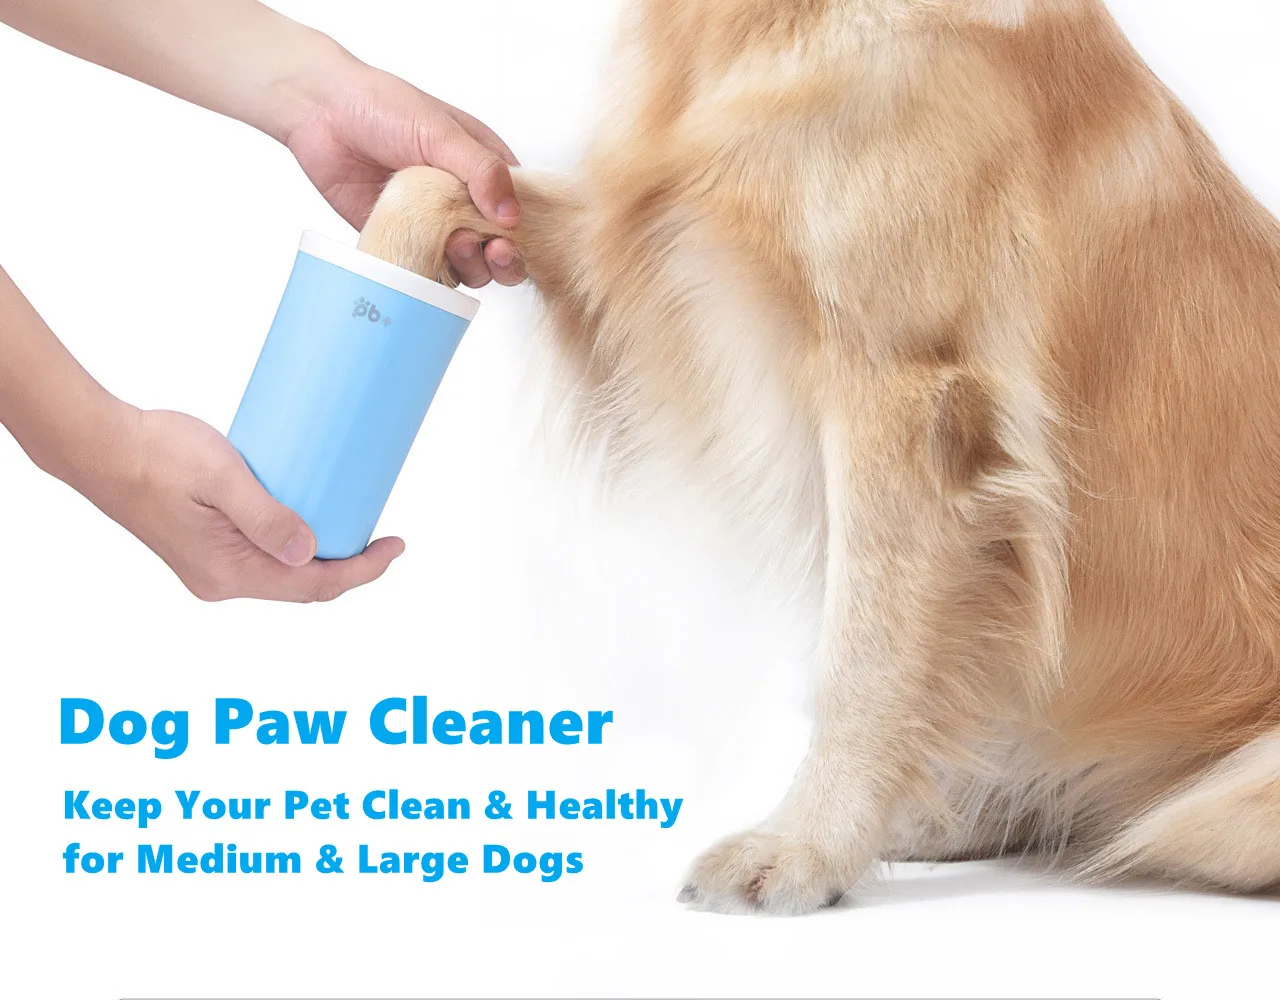 

Washer Romove Outdoor In Medium Silicone 1 Paw 2 Dirt And Pet Feet Cup For Large Cleaning Dogs Portable Brush Dog Cleaner Mud